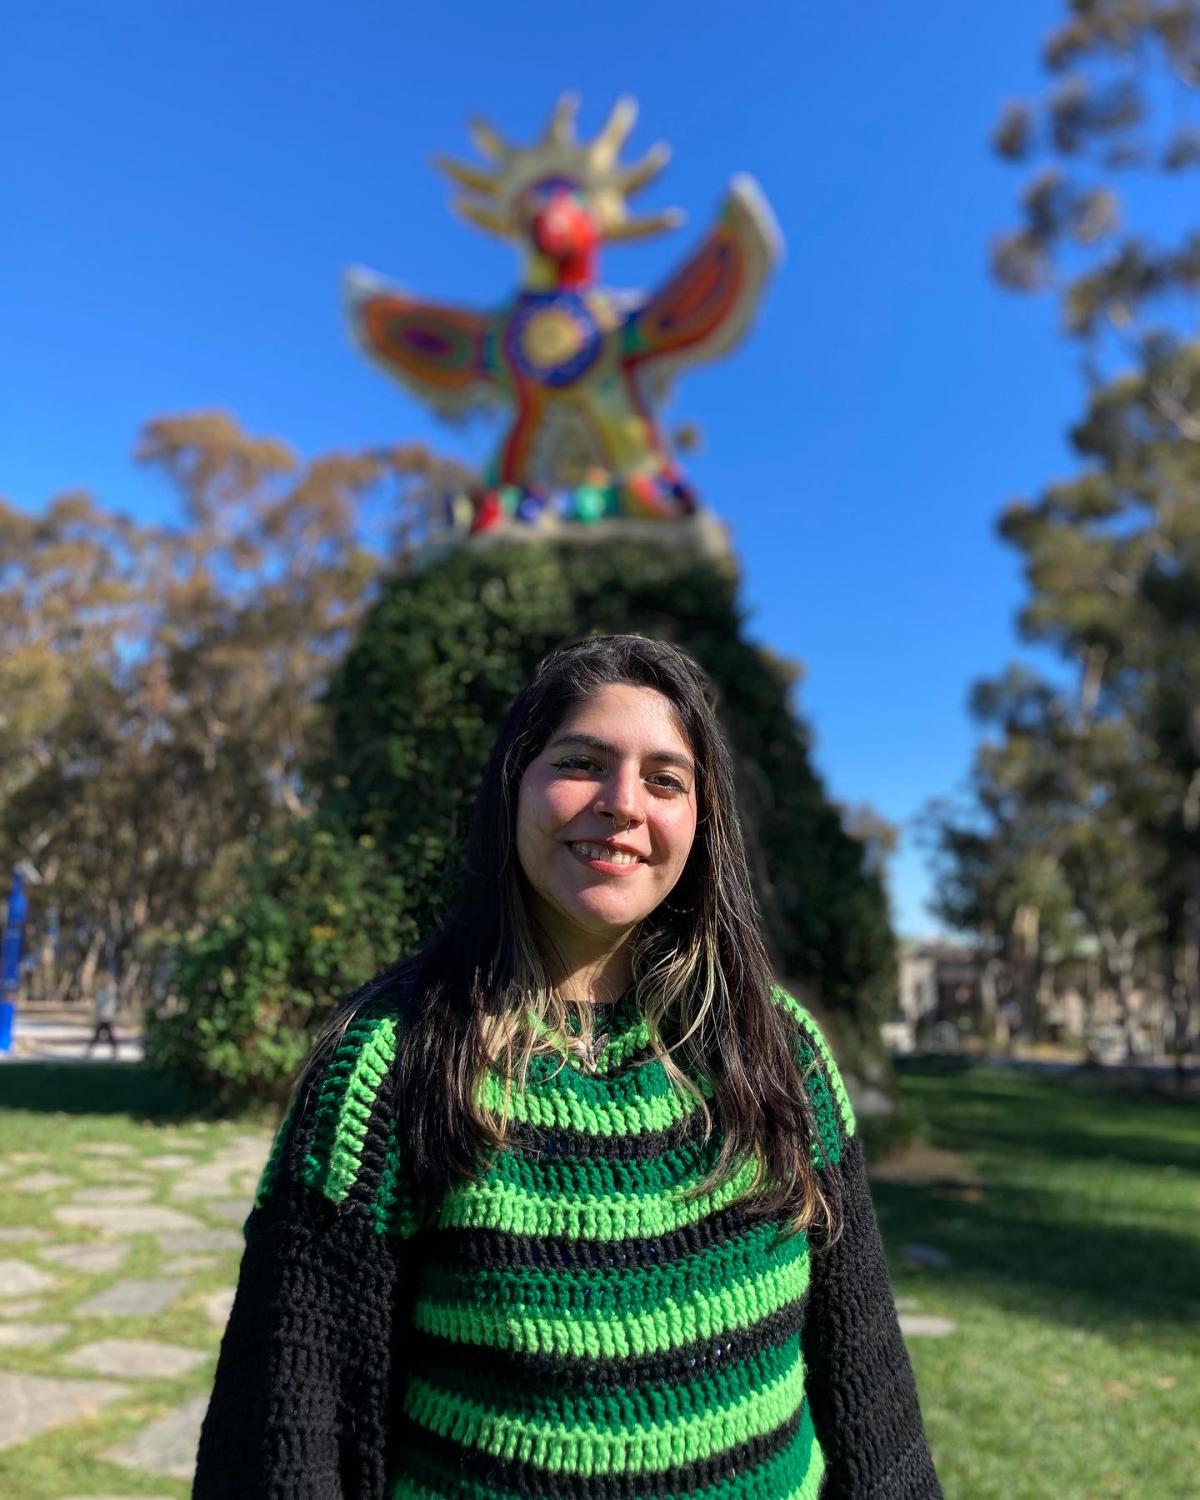 Juli Avalos at UCSD with Sun god statue in background